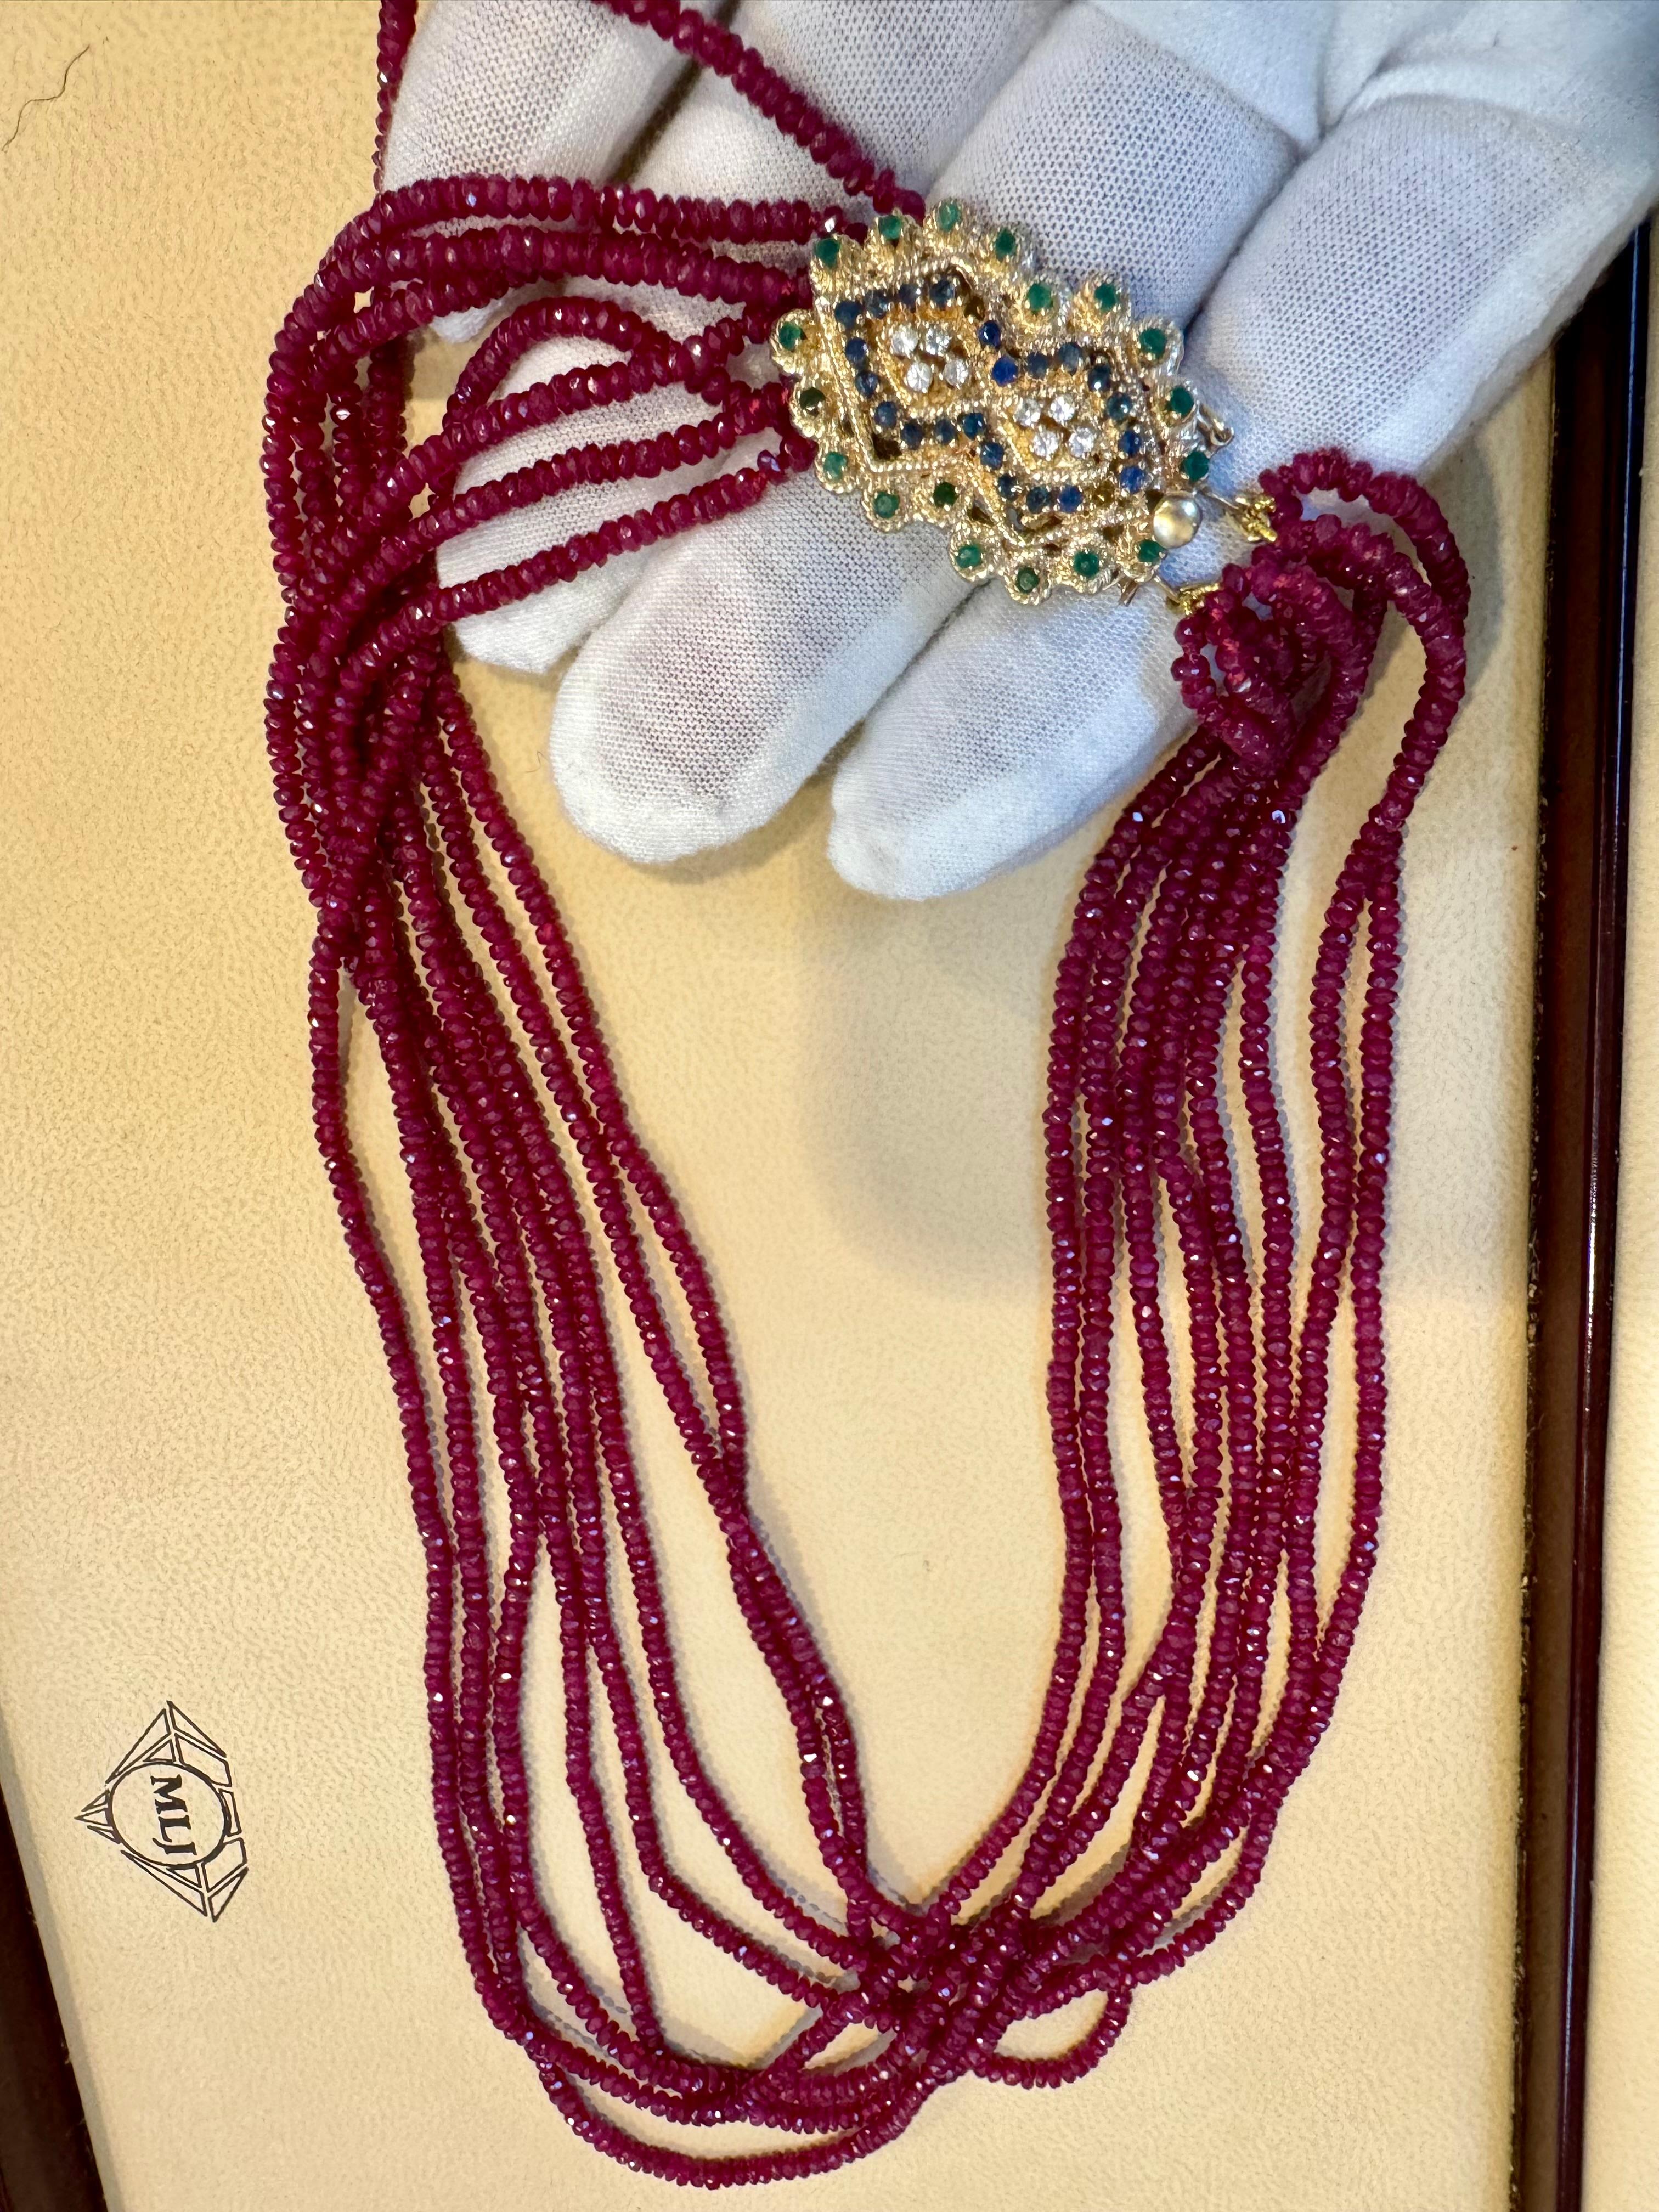 275 Ct , 8 Layer Natural Faceted Ruby Bead Necklace 14K Yellow Diamond Clasp Excellent état - En vente à New York, NY